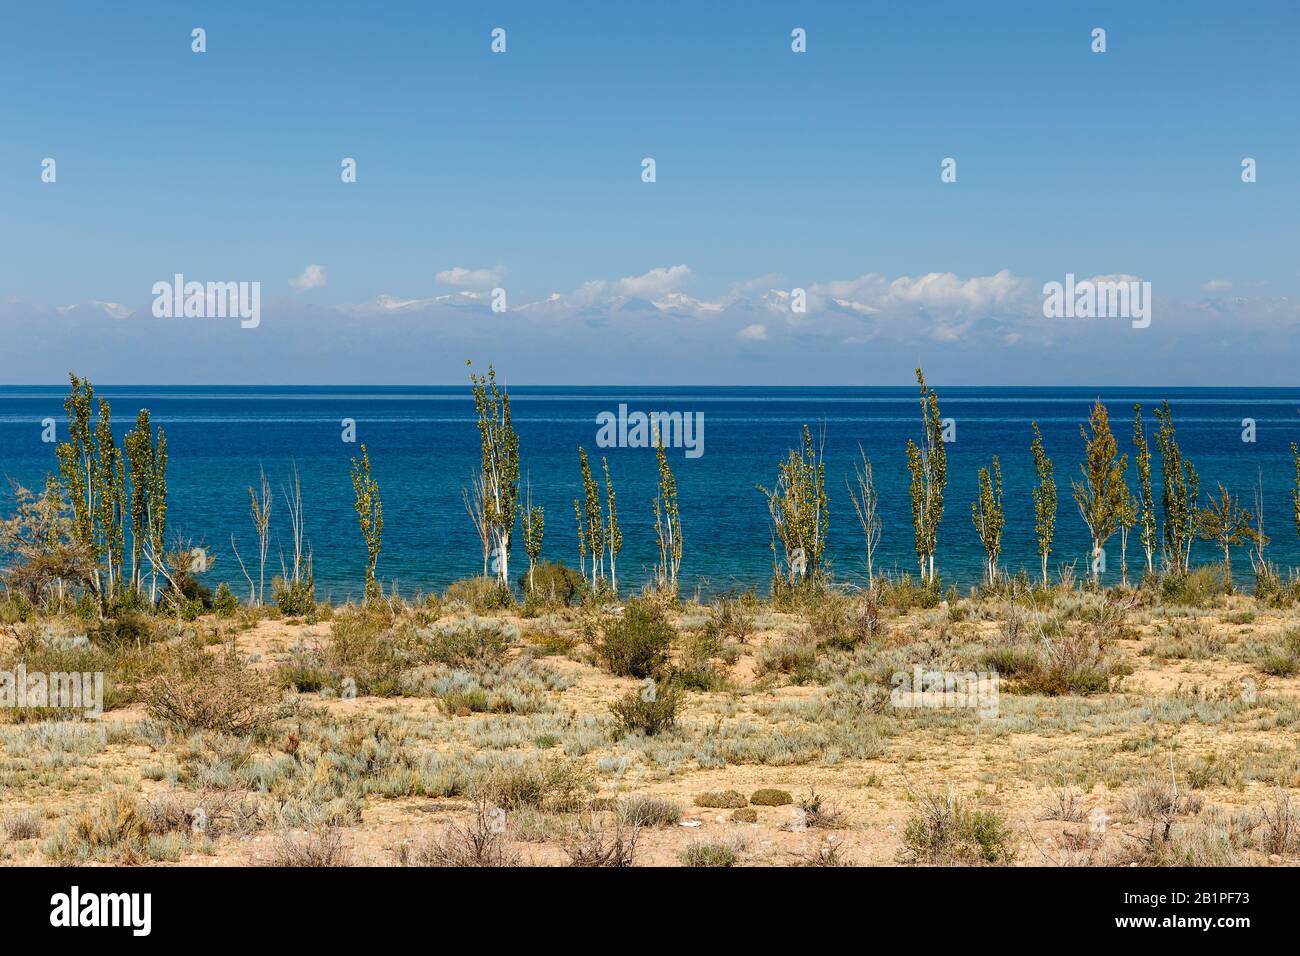 Lake Issyk-kul, Kyrgyzstan, the largest lake in Kyrgyzstan, young poplar trees ashore Stock Photo